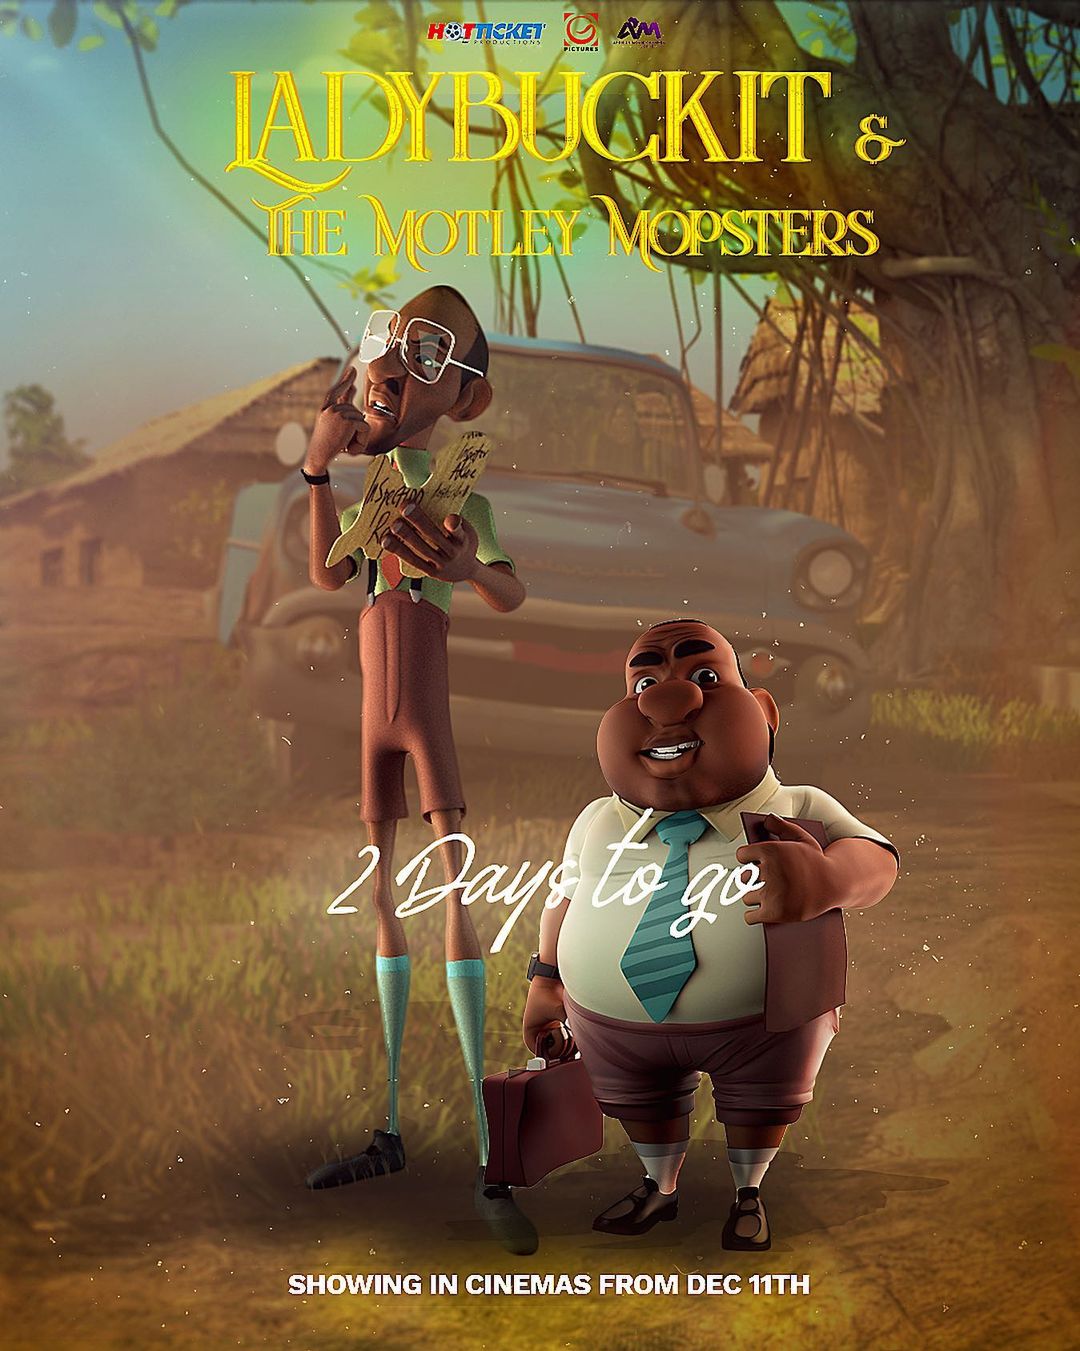 129773918 1261905304188220 7574900663204460936 n - Lady Buckit &amp; The Motley Mopsters Animation First Look and More Details